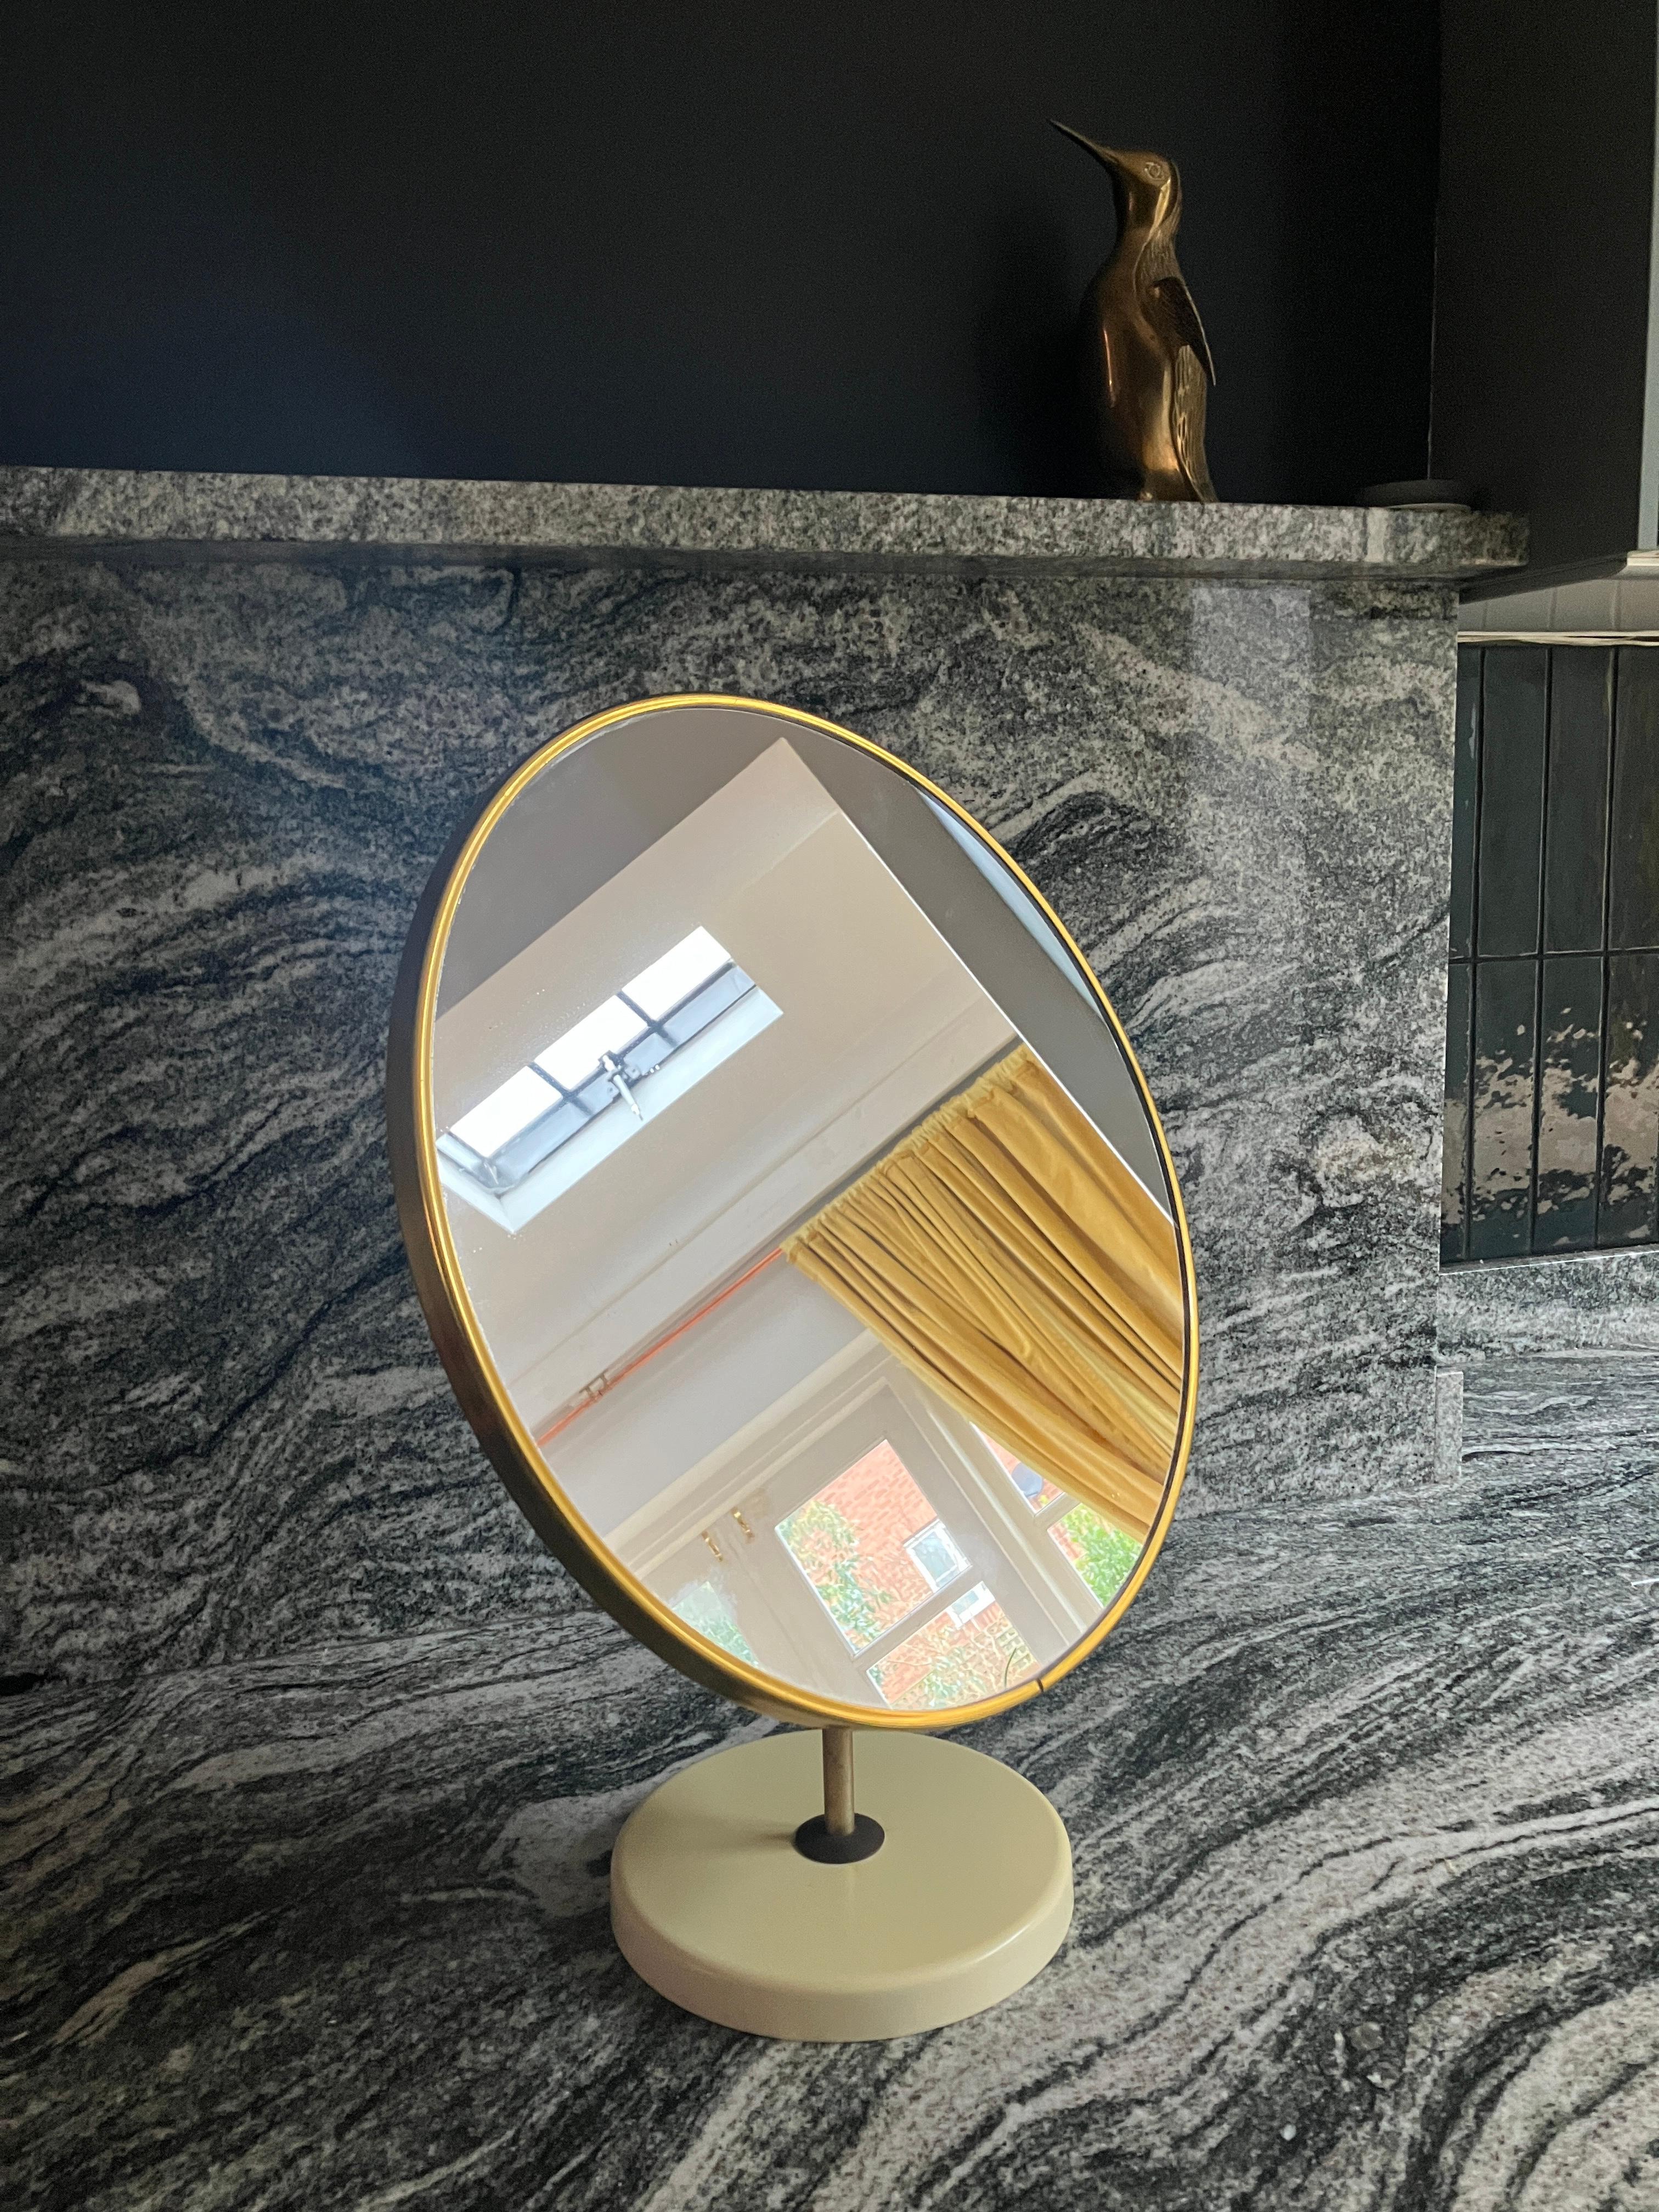 Large mid-century modern round vanity mirror. This 70's vintage table mirror has lovely proportions with a large mirror. The mirror is edged with a brass trim and the metal pole is finished in brass, too. The cream plastic stand makes the mirror